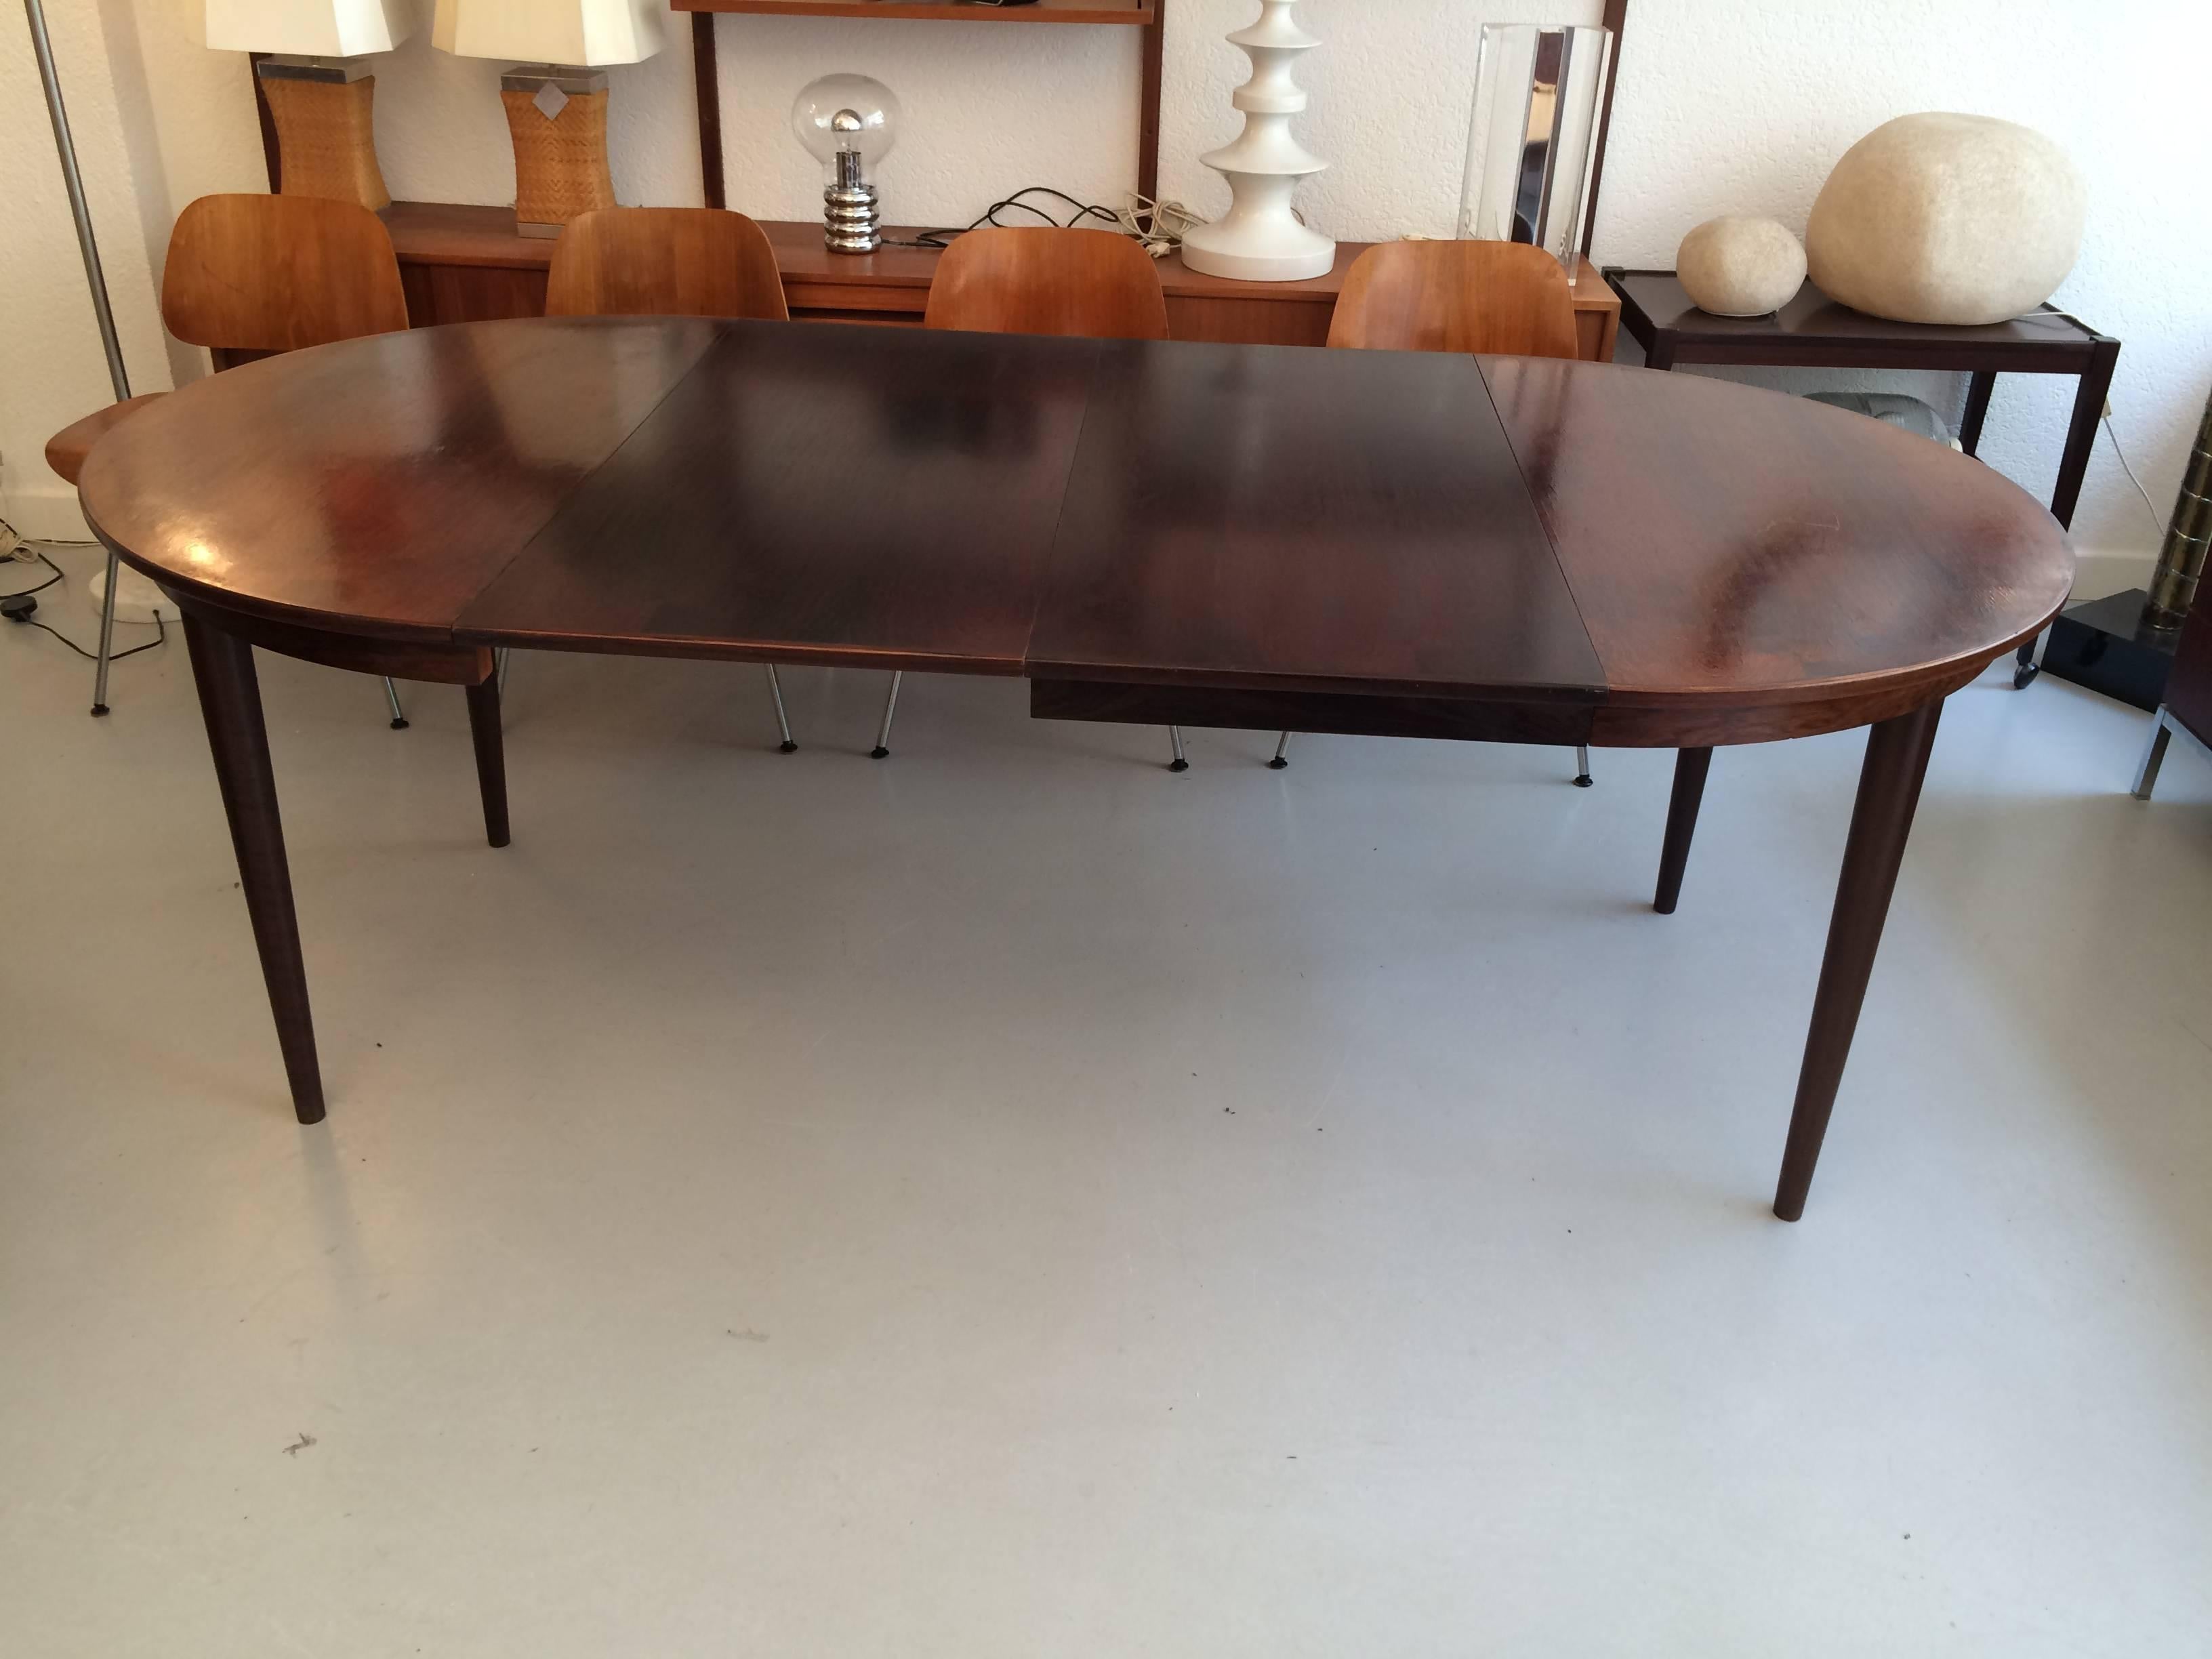 Danish rosewood dining table with two leaves.
Good vintage condition.